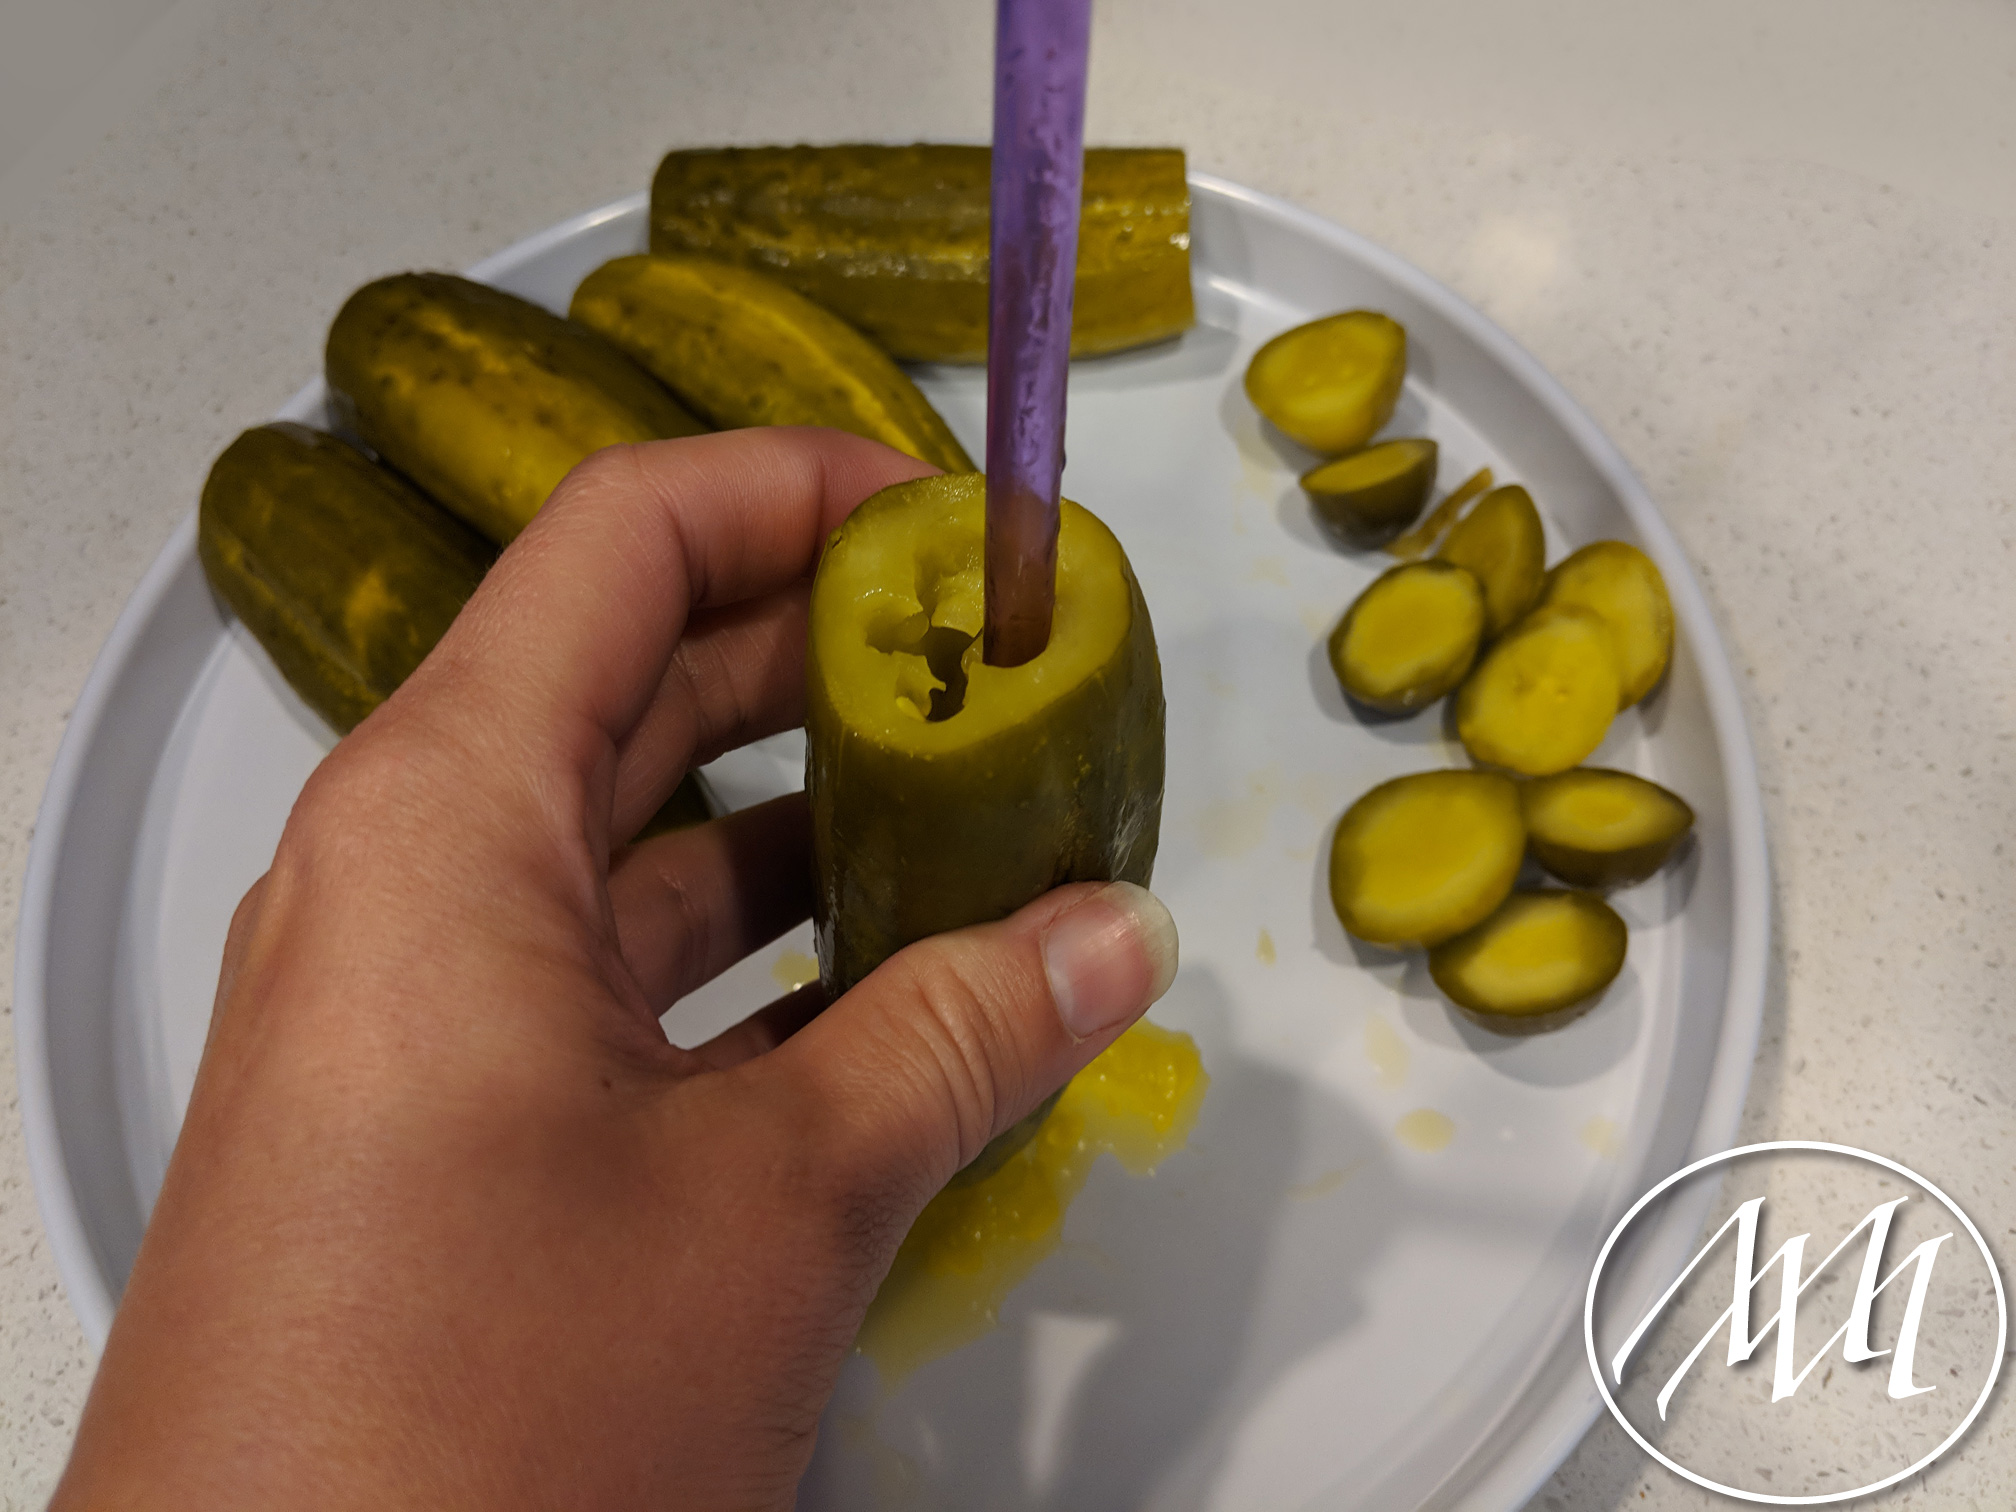 Using a plastic straw to core out the pickles